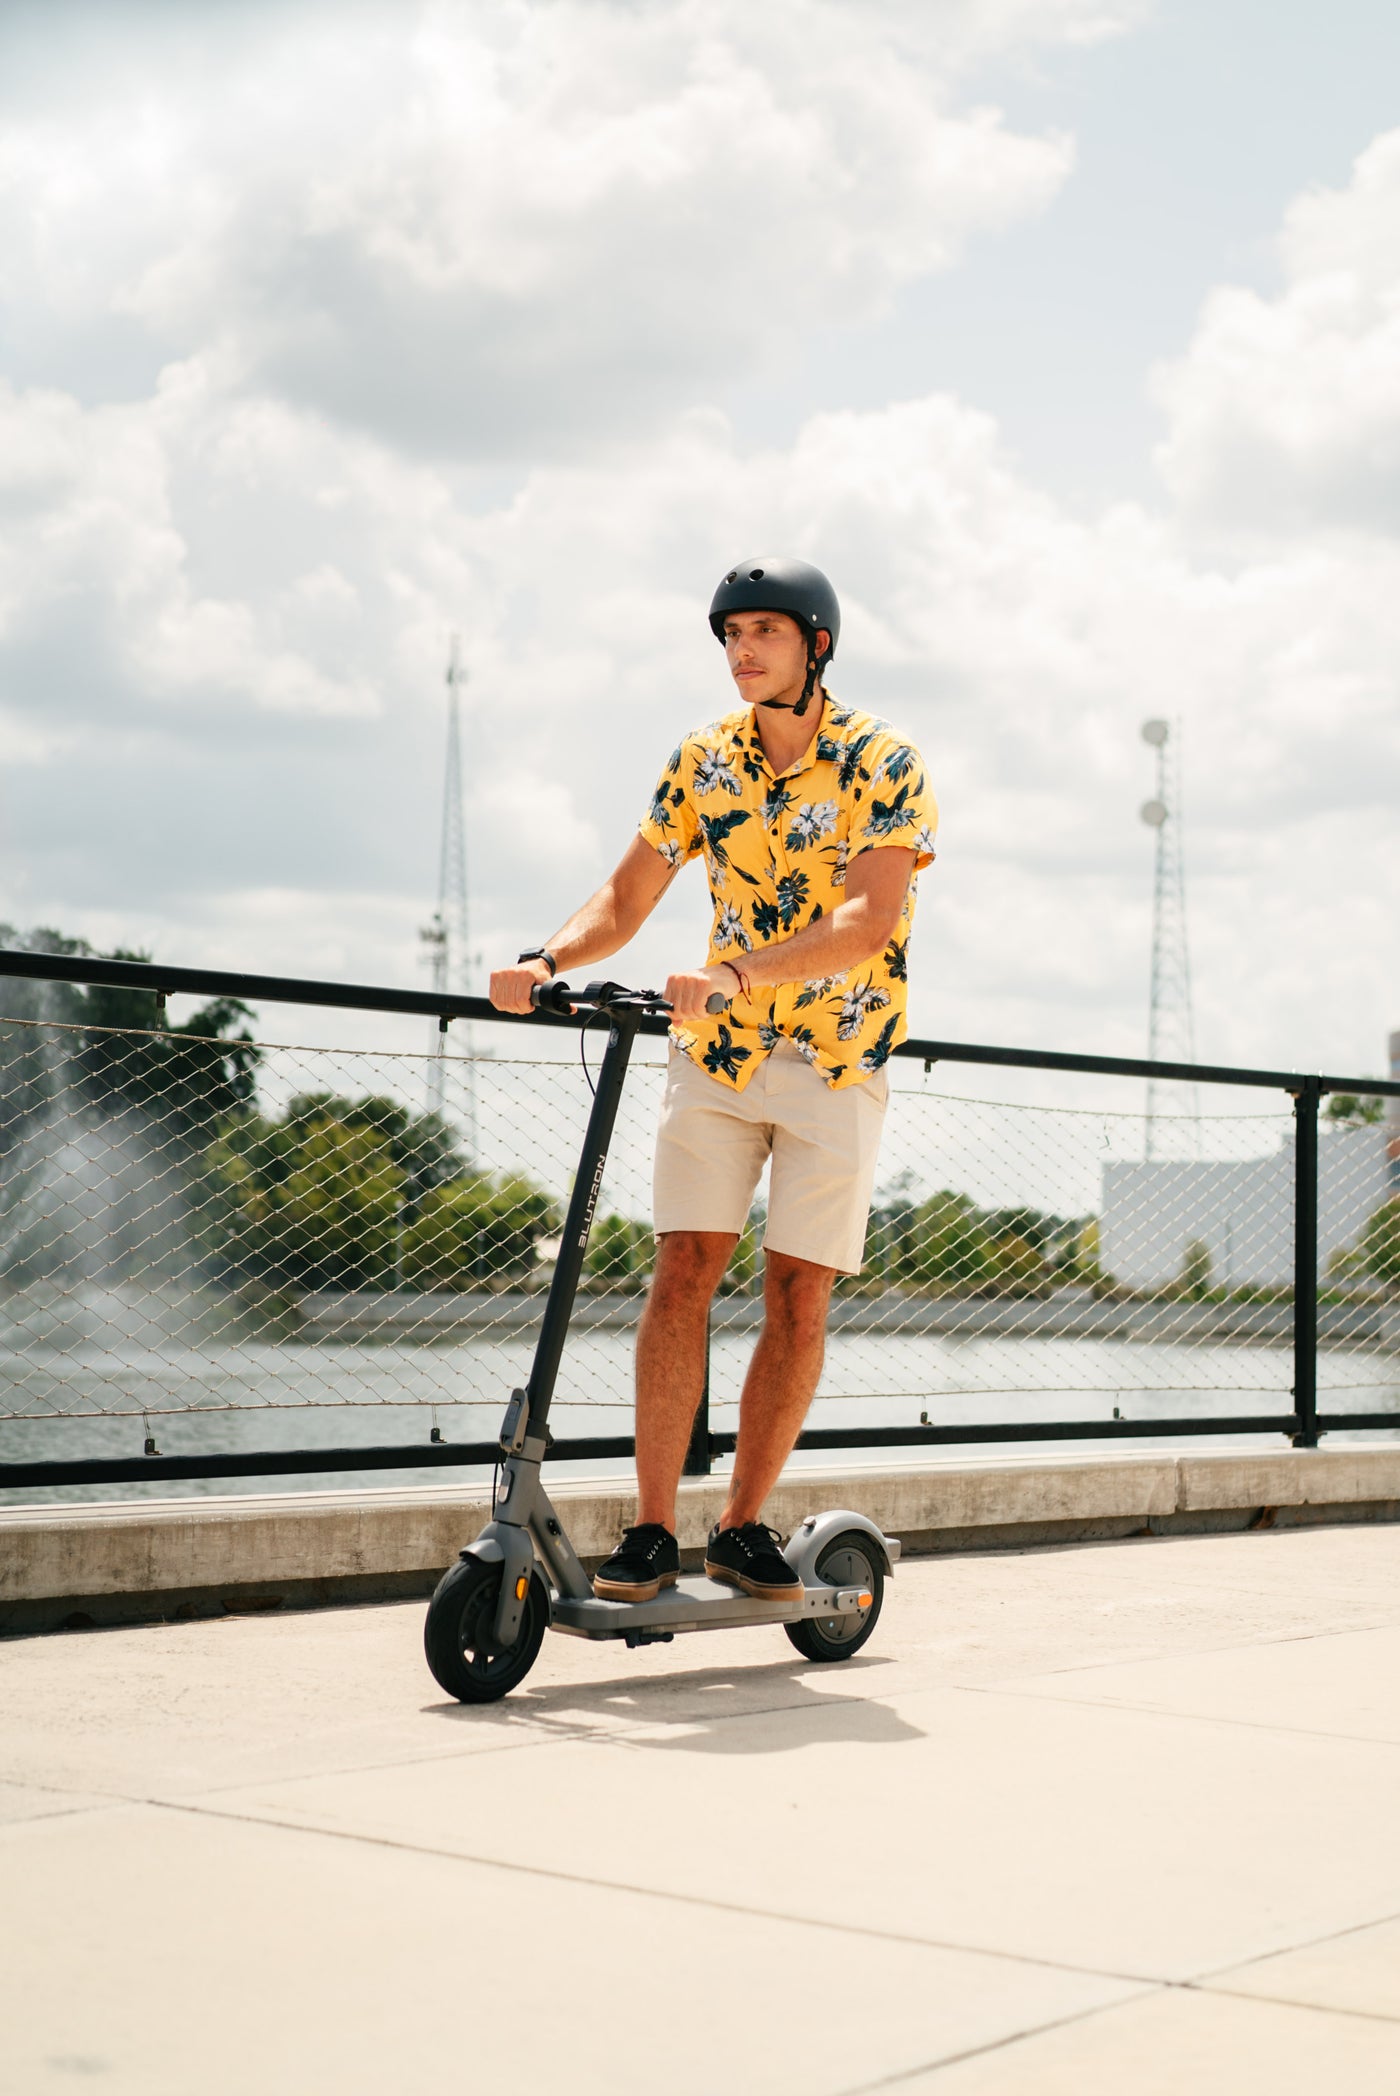 Blutron One S40 | 700W 20Mph 25Miles Electric Scooter